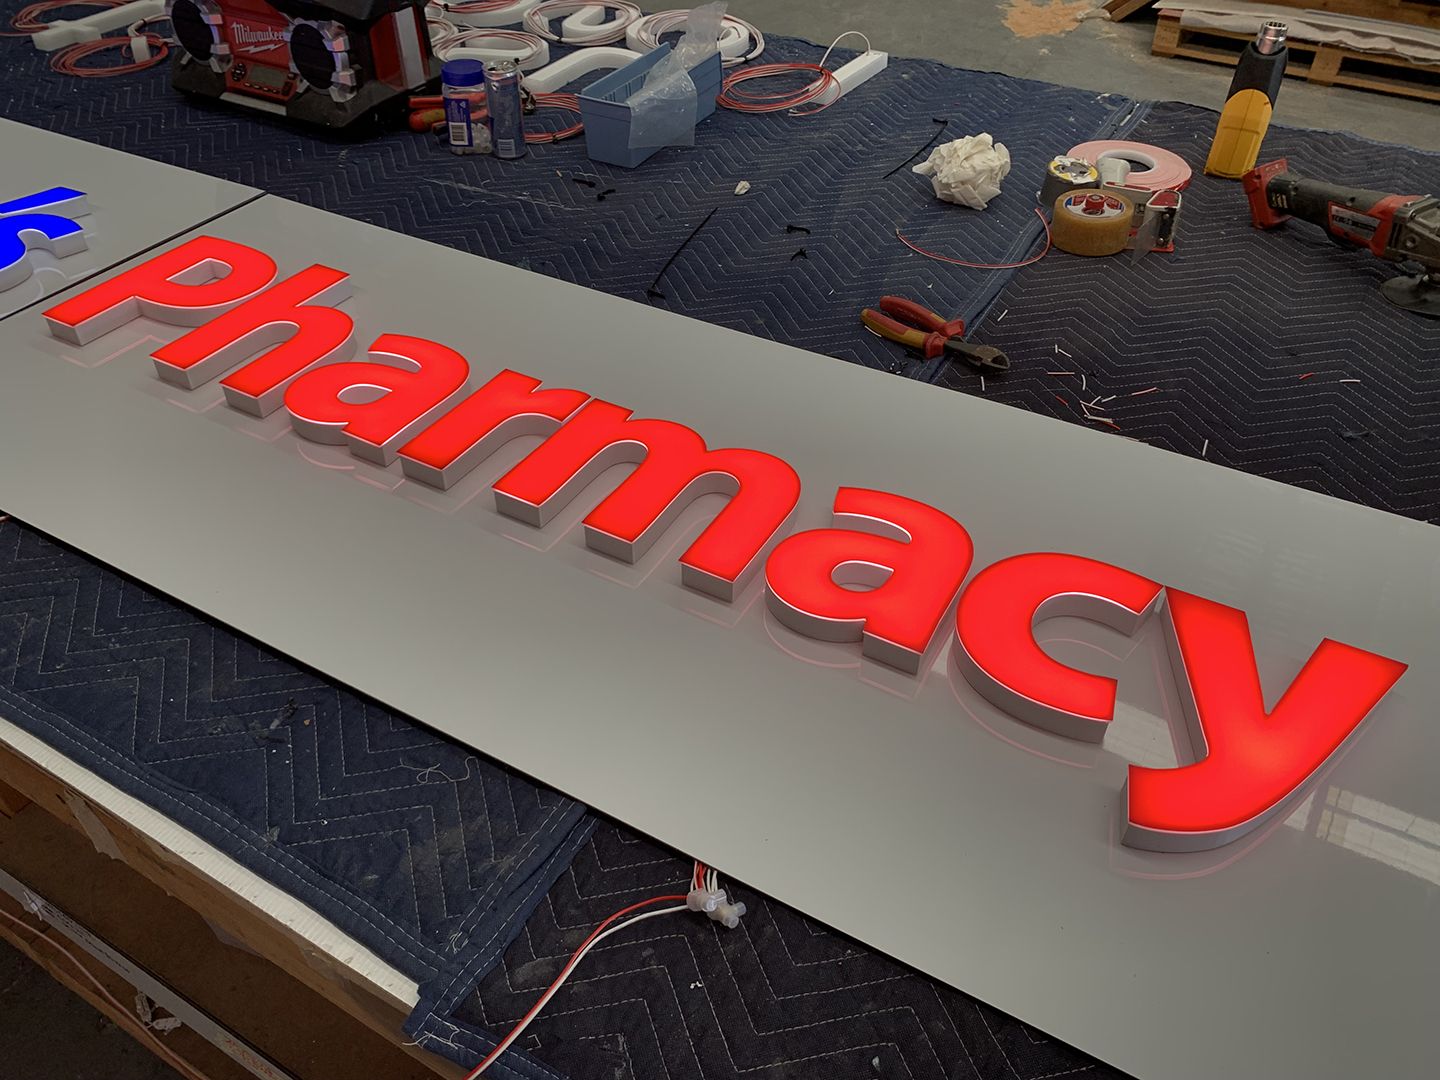 Foote's Pharmacy 3D Printed Building Signage